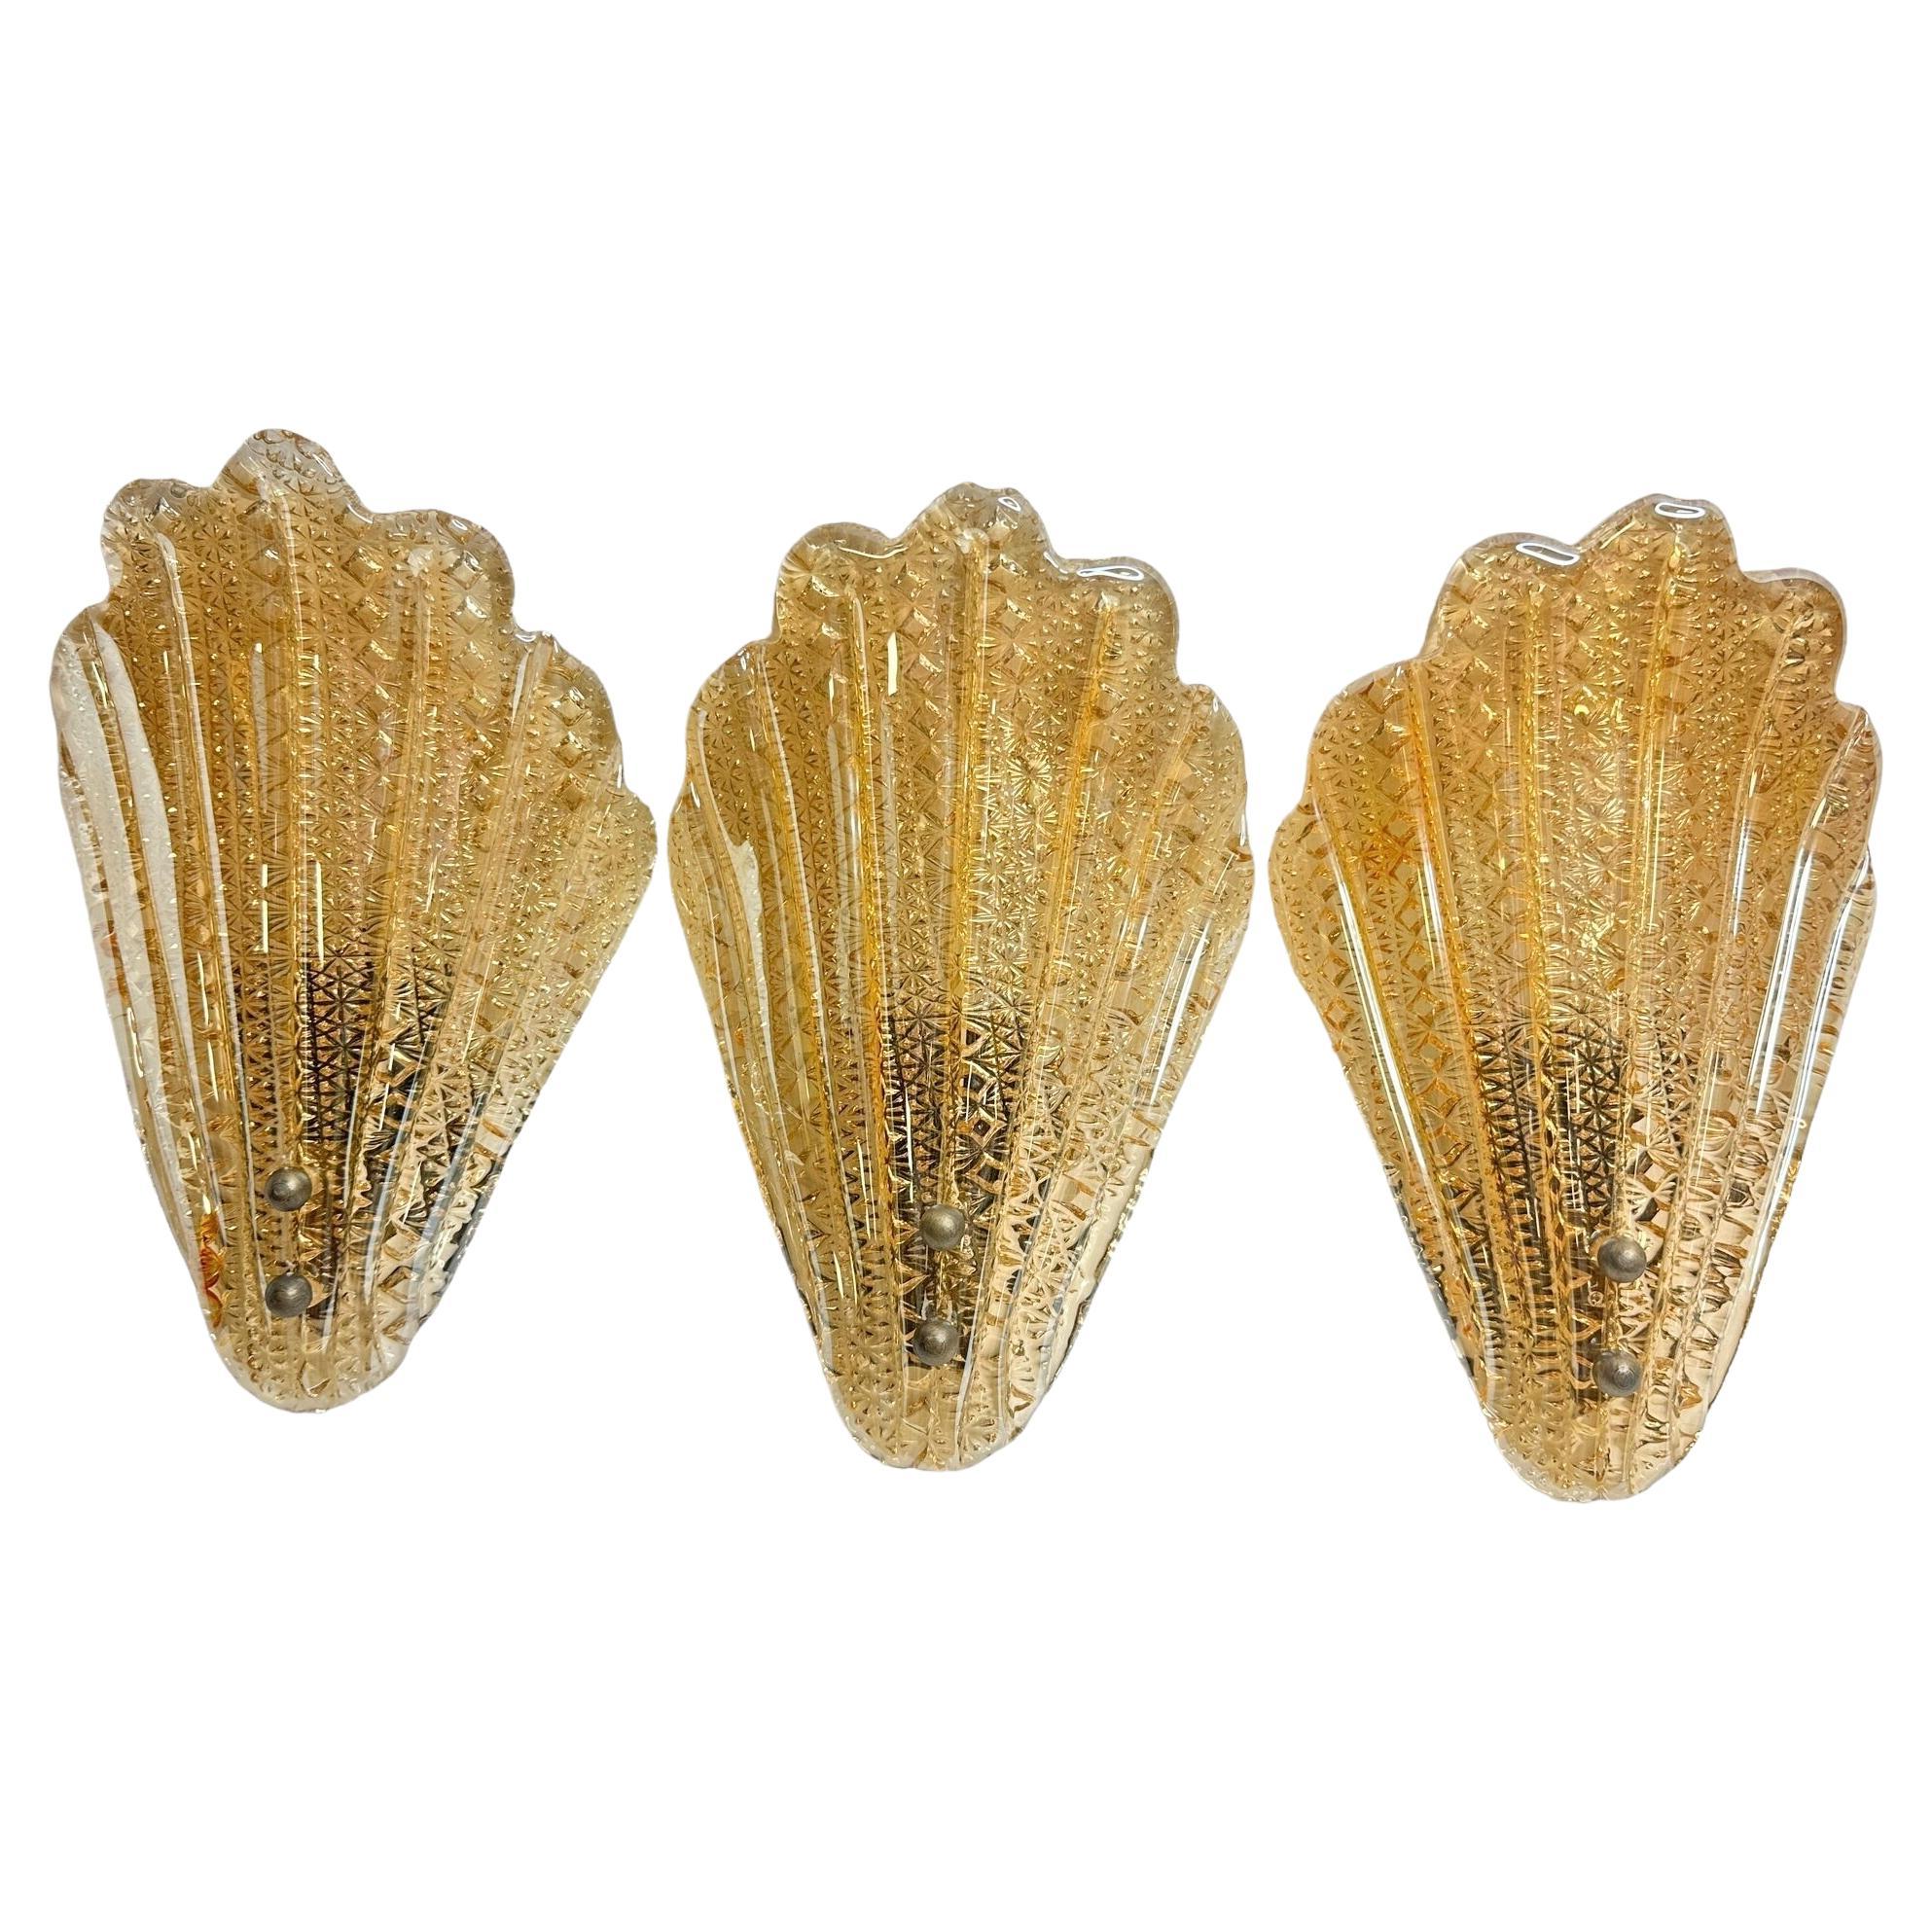 Stunning Set of Three Murano Glass Leaf Sconces by Barovier and Toso, Italy